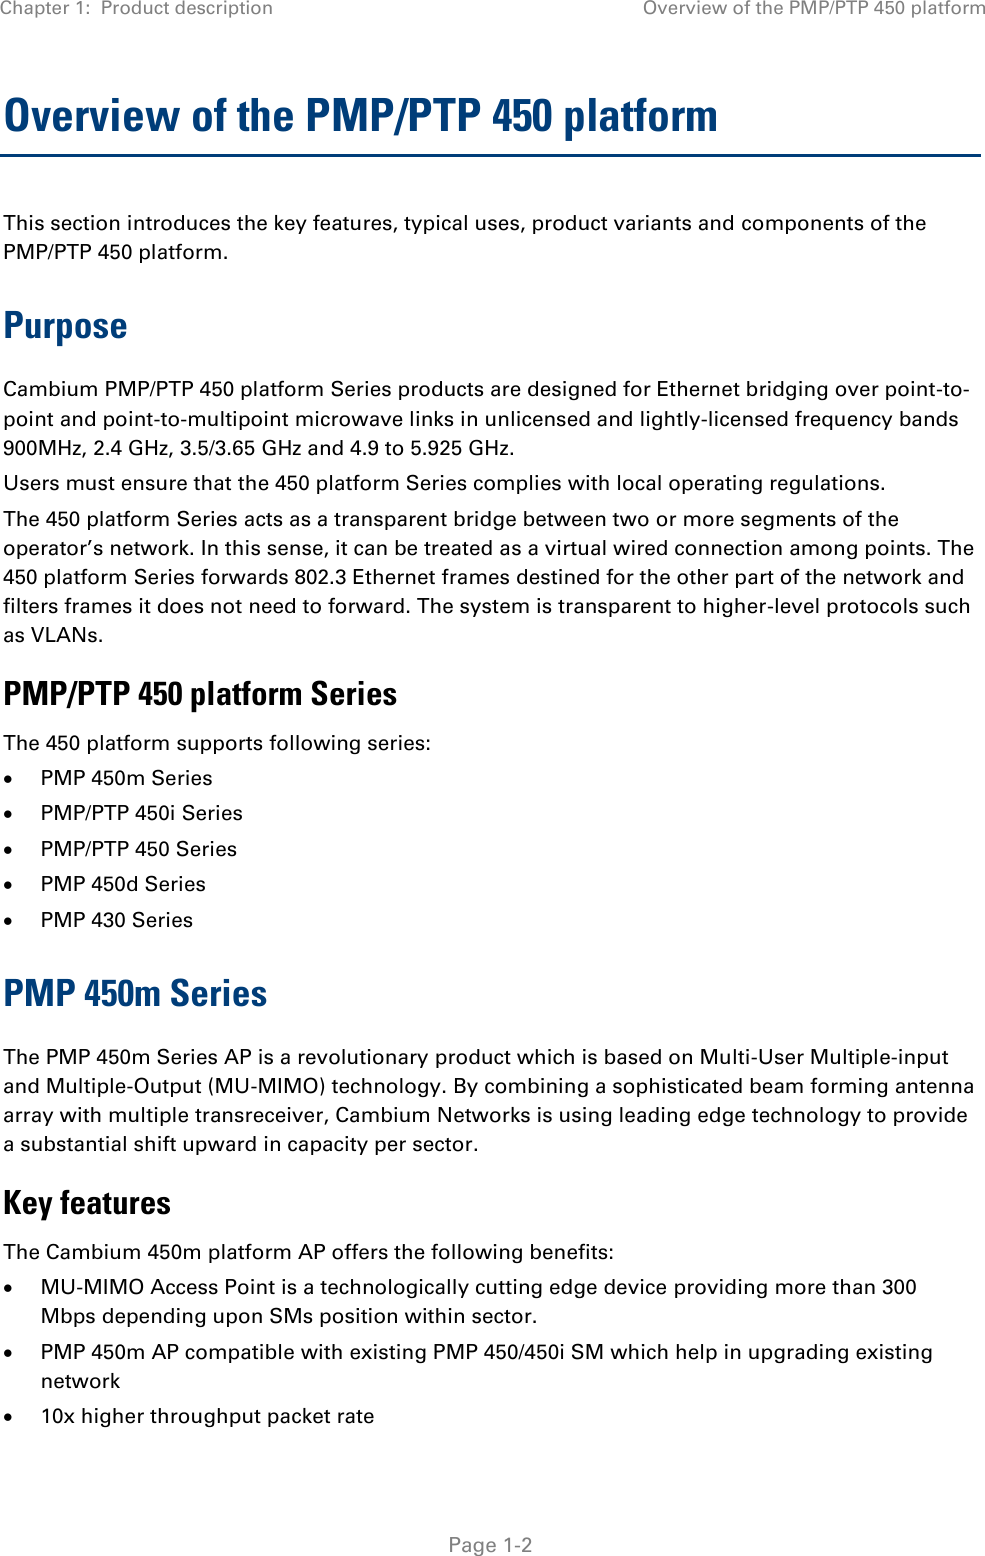 Chapter 1:  Product description Overview of the PMP/PTP 450 platform   Page 1-2 Overview of the PMP/PTP 450 platform This section introduces the key features, typical uses, product variants and components of the PMP/PTP 450 platform. Purpose Cambium PMP/PTP 450 platform Series products are designed for Ethernet bridging over point-to-point and point-to-multipoint microwave links in unlicensed and lightly-licensed frequency bands 900MHz, 2.4 GHz, 3.5/3.65 GHz and 4.9 to 5.925 GHz. Users must ensure that the 450 platform Series complies with local operating regulations. The 450 platform Series acts as a transparent bridge between two or more segments of the operator’s network. In this sense, it can be treated as a virtual wired connection among points. The 450 platform Series forwards 802.3 Ethernet frames destined for the other part of the network and filters frames it does not need to forward. The system is transparent to higher-level protocols such as VLANs. PMP/PTP 450 platform Series The 450 platform supports following series:  PMP 450m Series  PMP/PTP 450i Series   PMP/PTP 450 Series  PMP 450d Series  PMP 430 Series PMP 450m Series The PMP 450m Series AP is a revolutionary product which is based on Multi-User Multiple-input and Multiple-Output (MU-MIMO) technology. By combining a sophisticated beam forming antenna array with multiple transreceiver, Cambium Networks is using leading edge technology to provide a substantial shift upward in capacity per sector. Key features The Cambium 450m platform AP offers the following benefits:  MU-MIMO Access Point is a technologically cutting edge device providing more than 300 Mbps depending upon SMs position within sector.  PMP 450m AP compatible with existing PMP 450/450i SM which help in upgrading existing network  10x higher throughput packet rate 